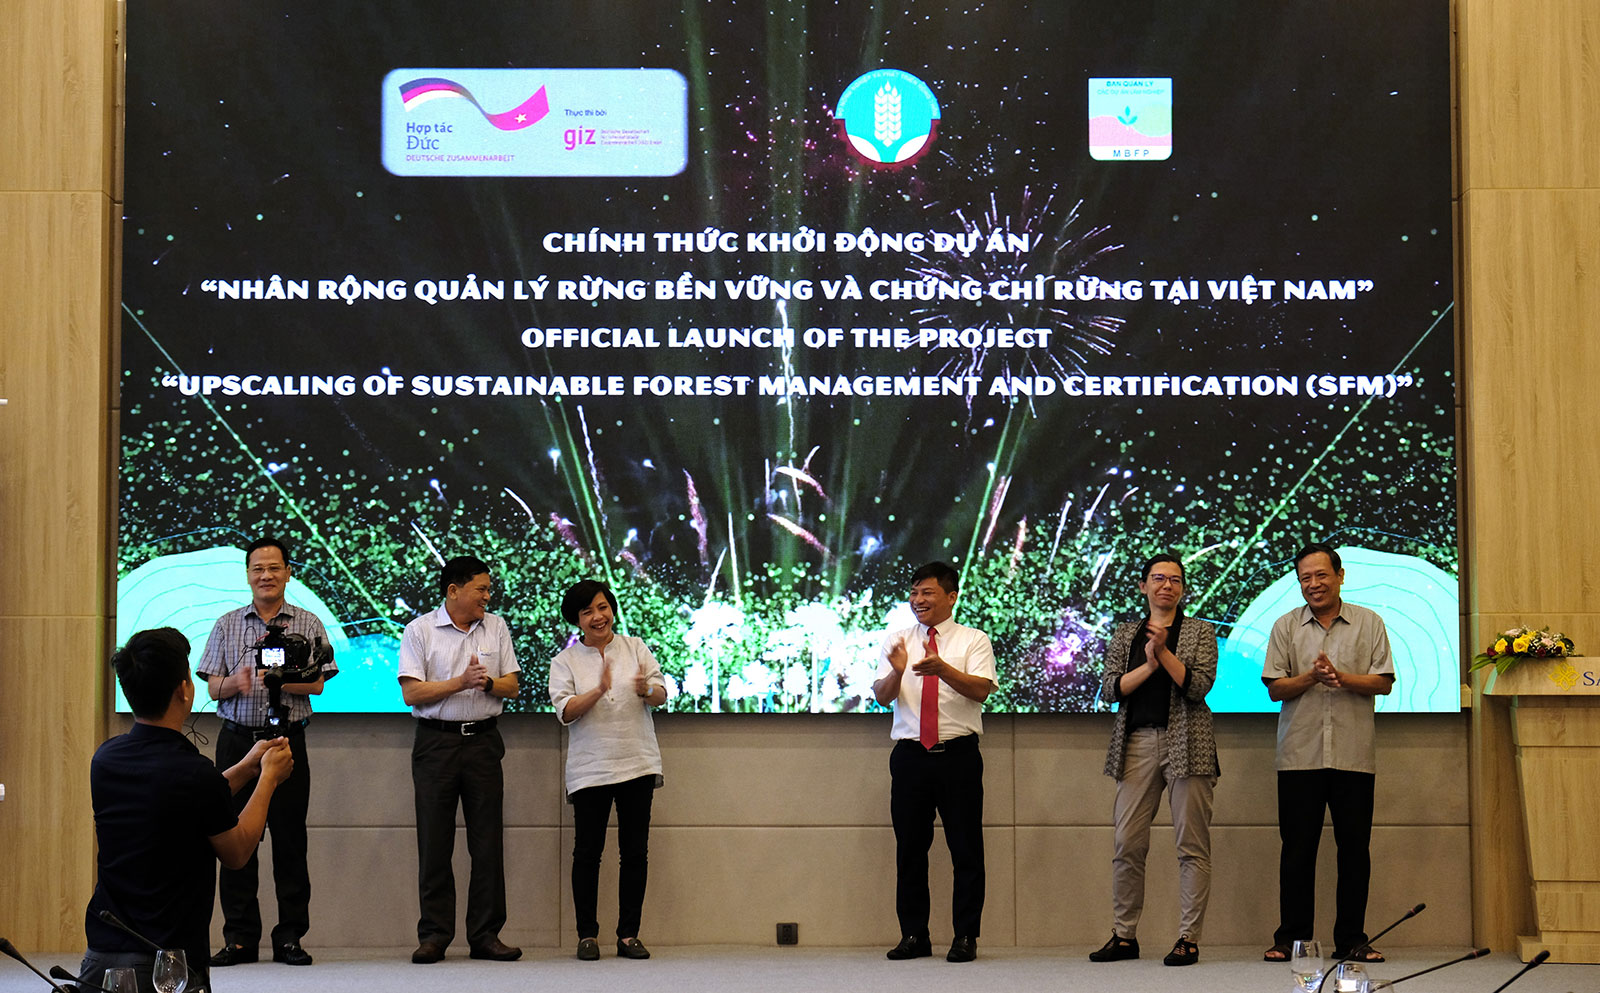 Official joint launch of the project. Photo: ©GIZ/ Pham Phuong Thao